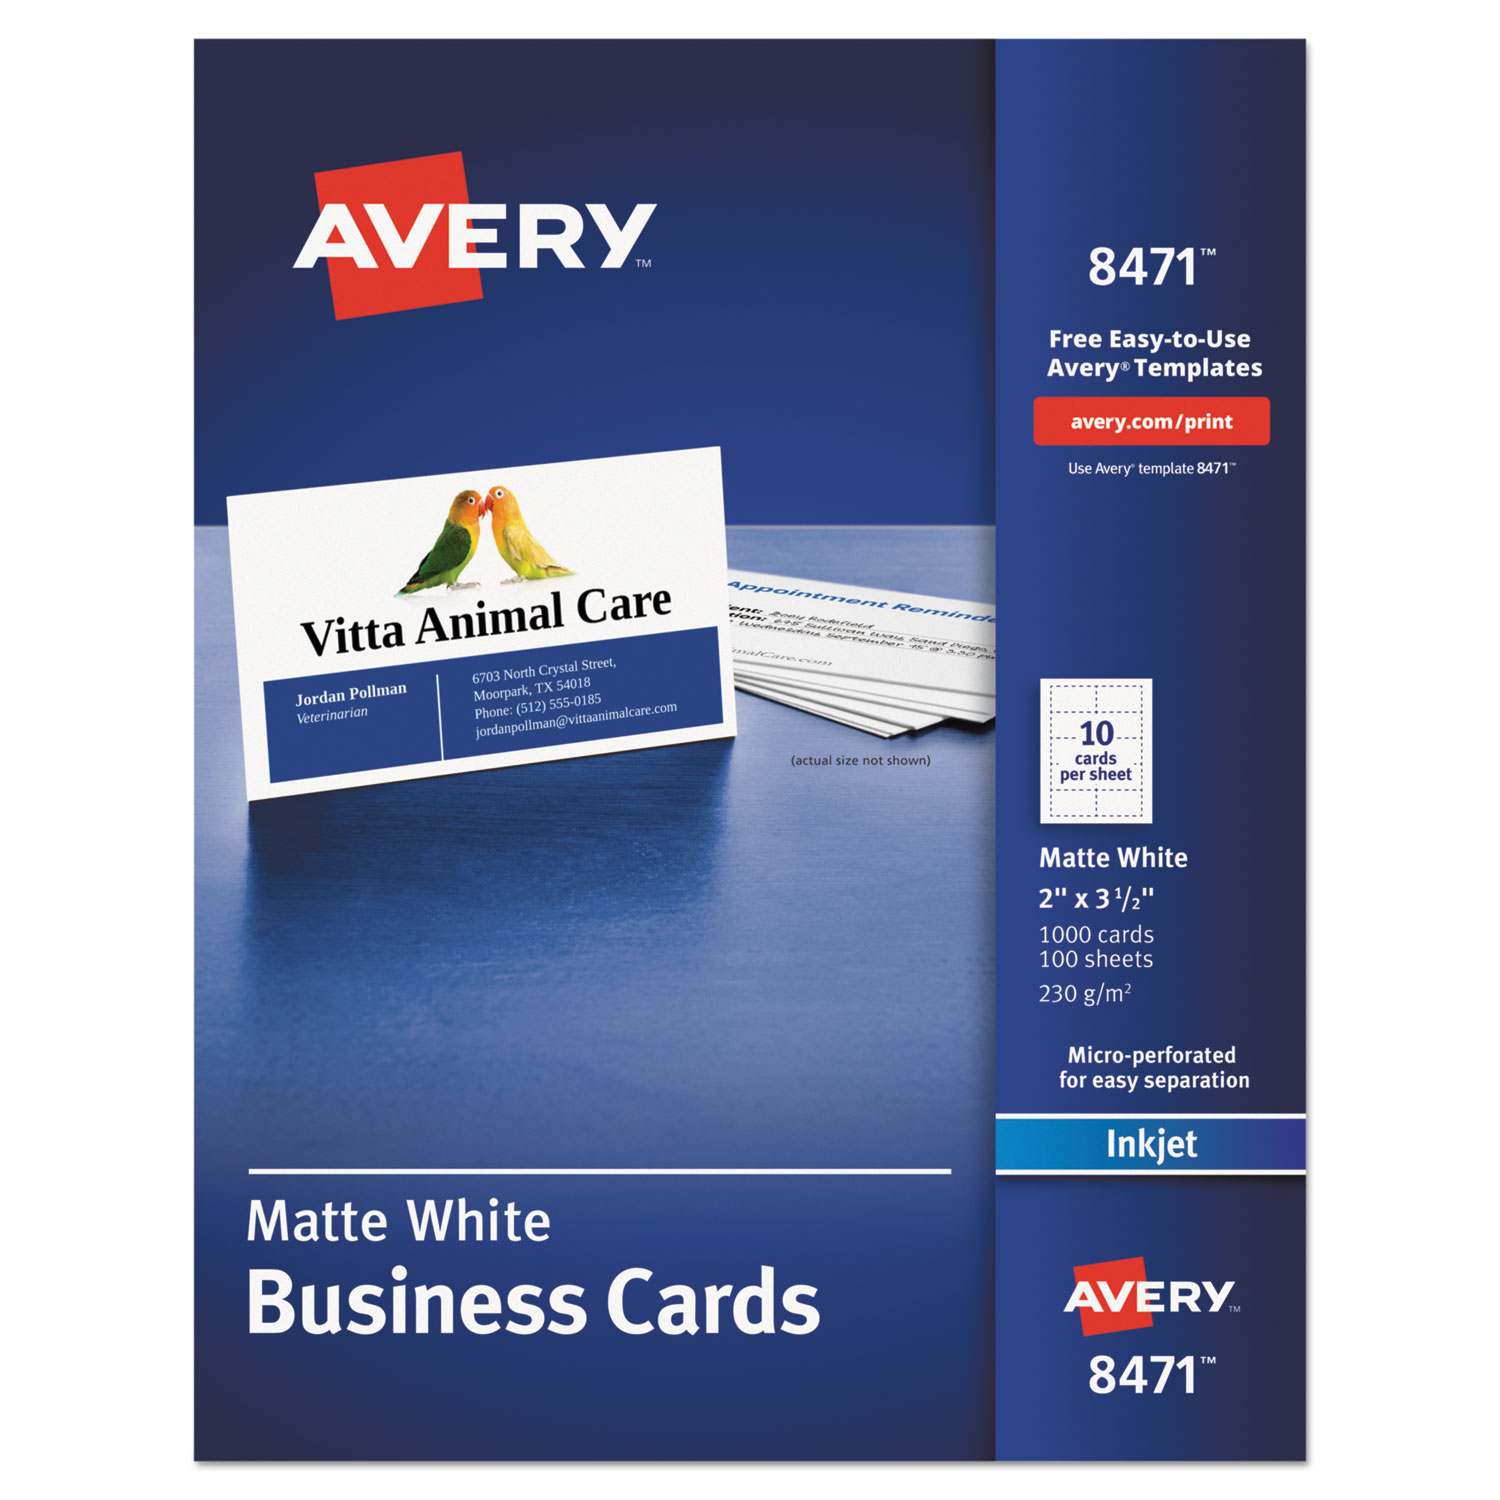  Avery 08471 Printable Microperf Business Cards, Inkjet, 2 x 3 1/2, White, Matte, 1000/Box (AVE8471) 